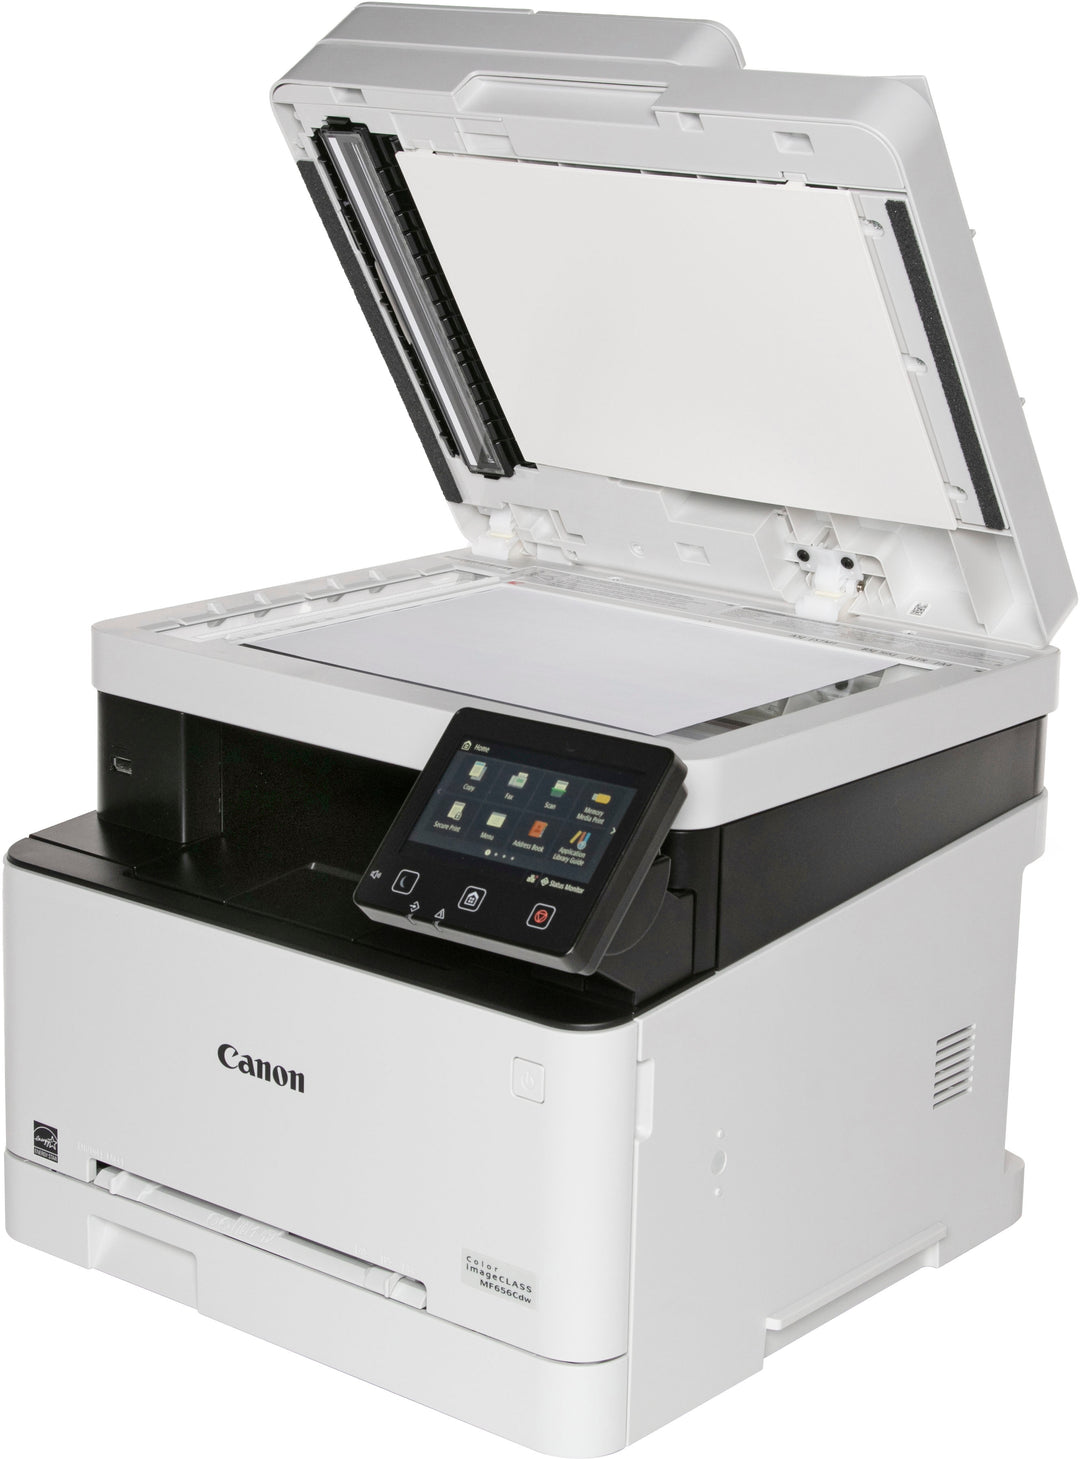 Canon - imageCLASS MF656Cdw Wireless Color All-In-One Laser Printer with Fax - White_12